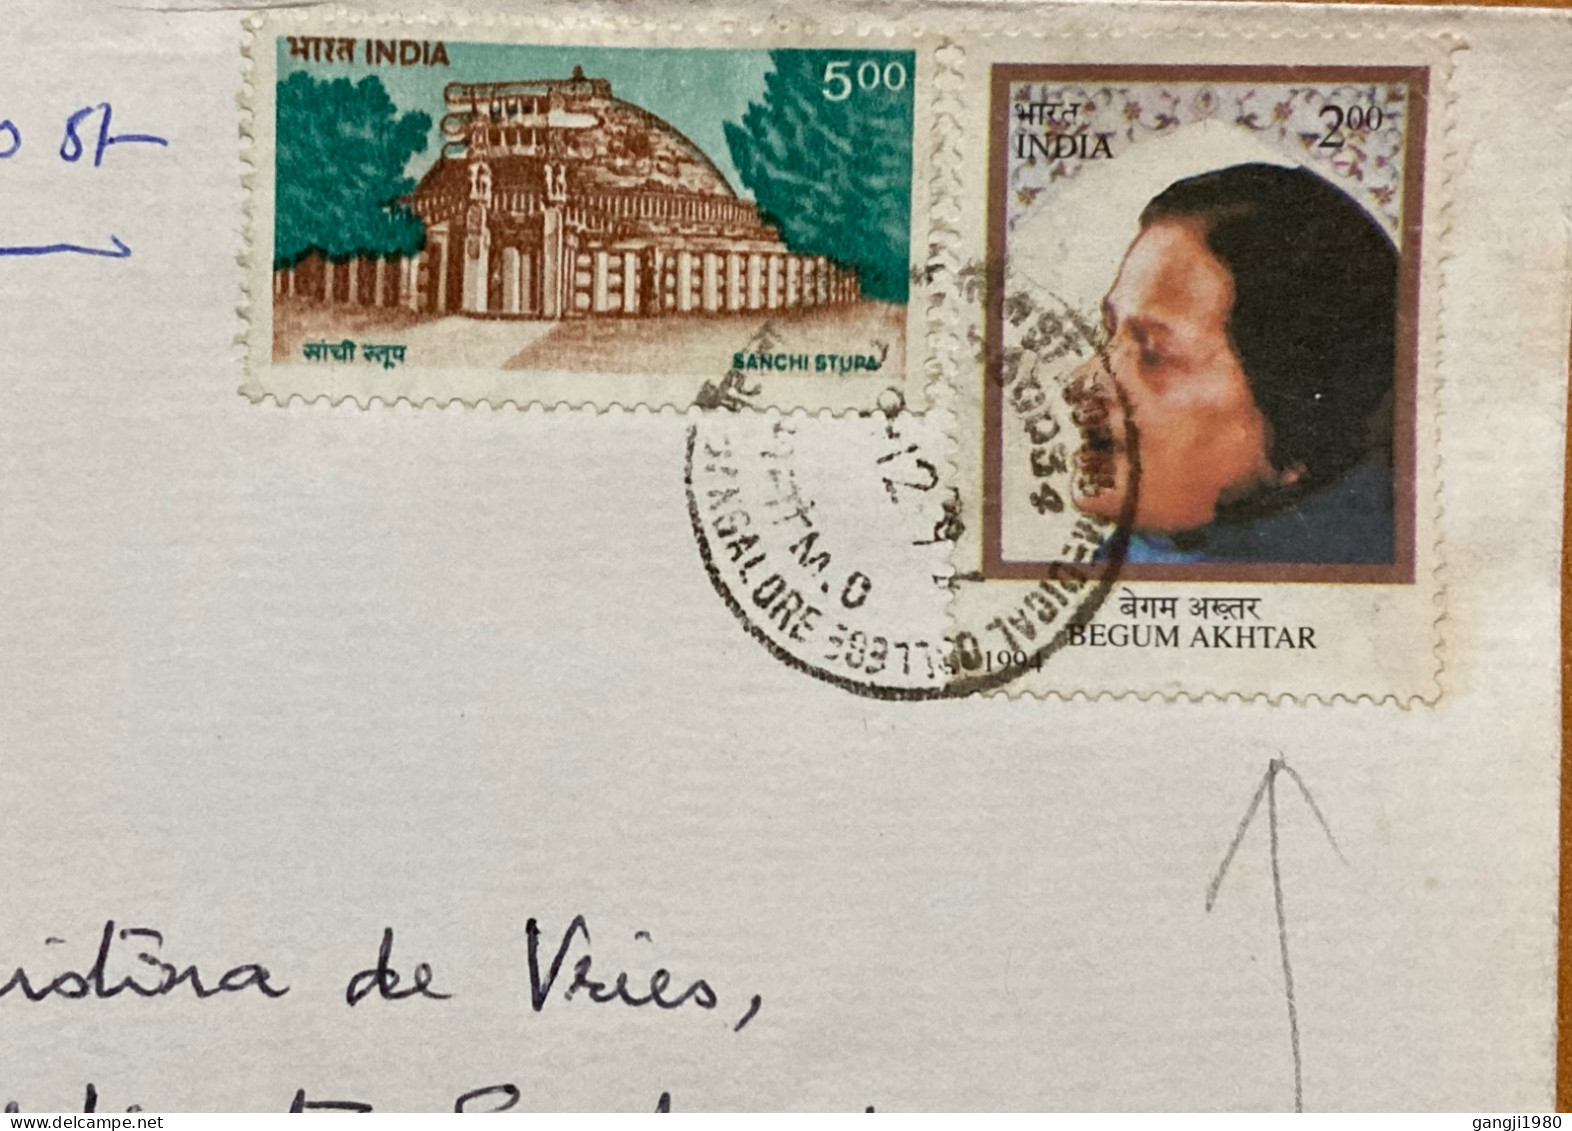 INDIA 1994, COVER USED TO NETHERLANDS, WITHDRAWN STAMP BEGUM AKHTAR, & SANCHI STUPA, RARE USE ON COVER, BANGALORE CITY C - Cartas & Documentos